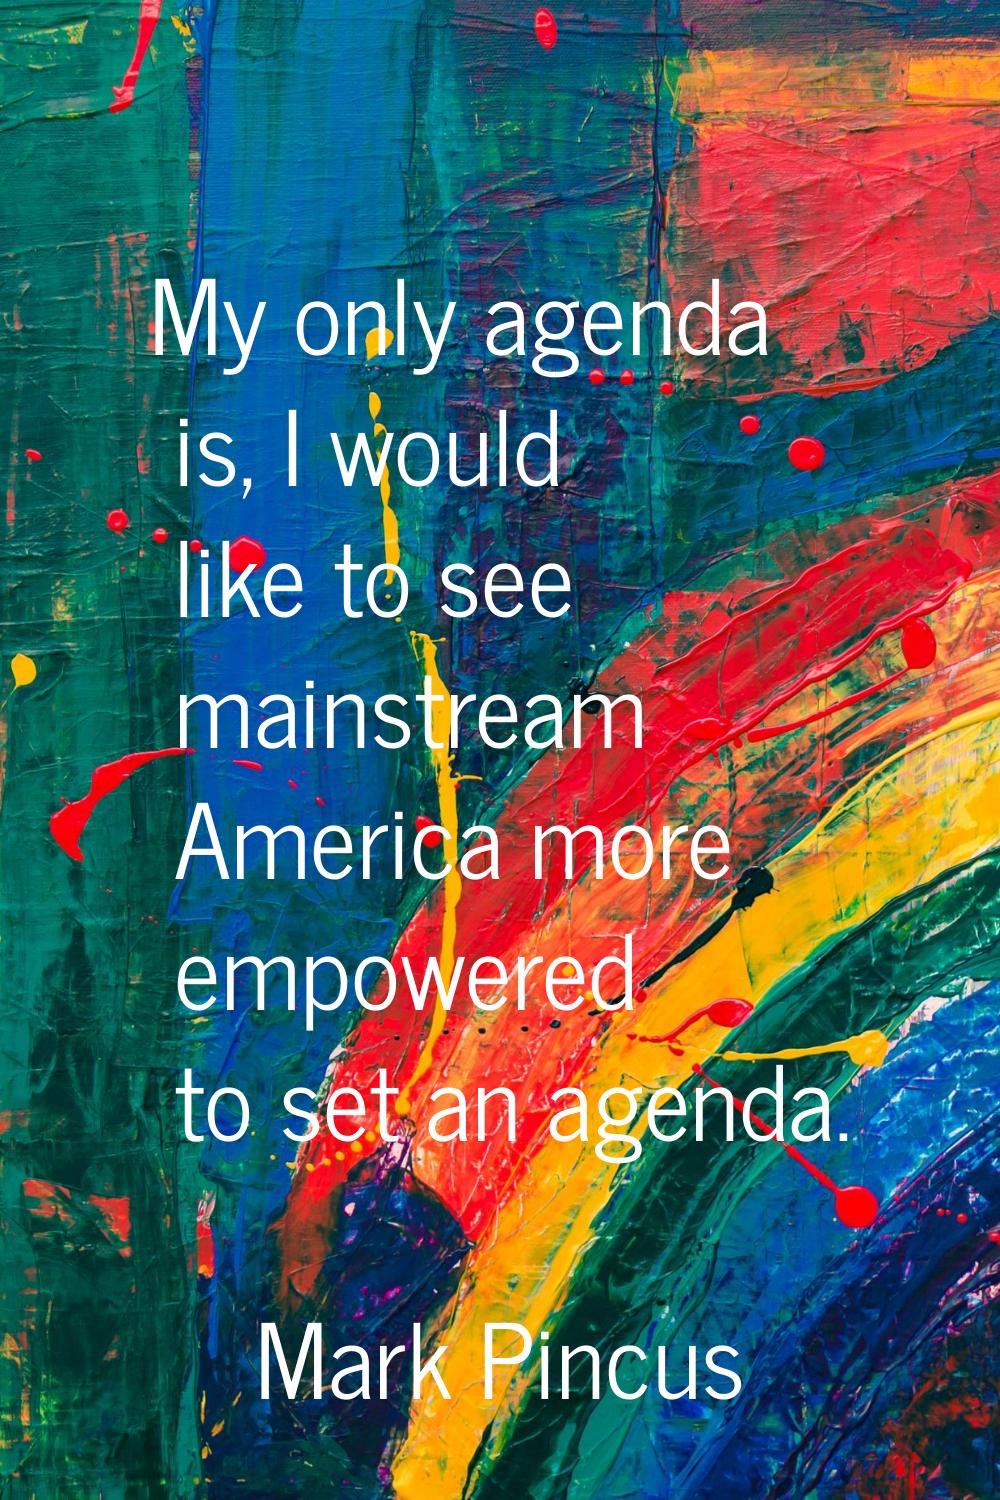 My only agenda is, I would like to see mainstream America more empowered to set an agenda.